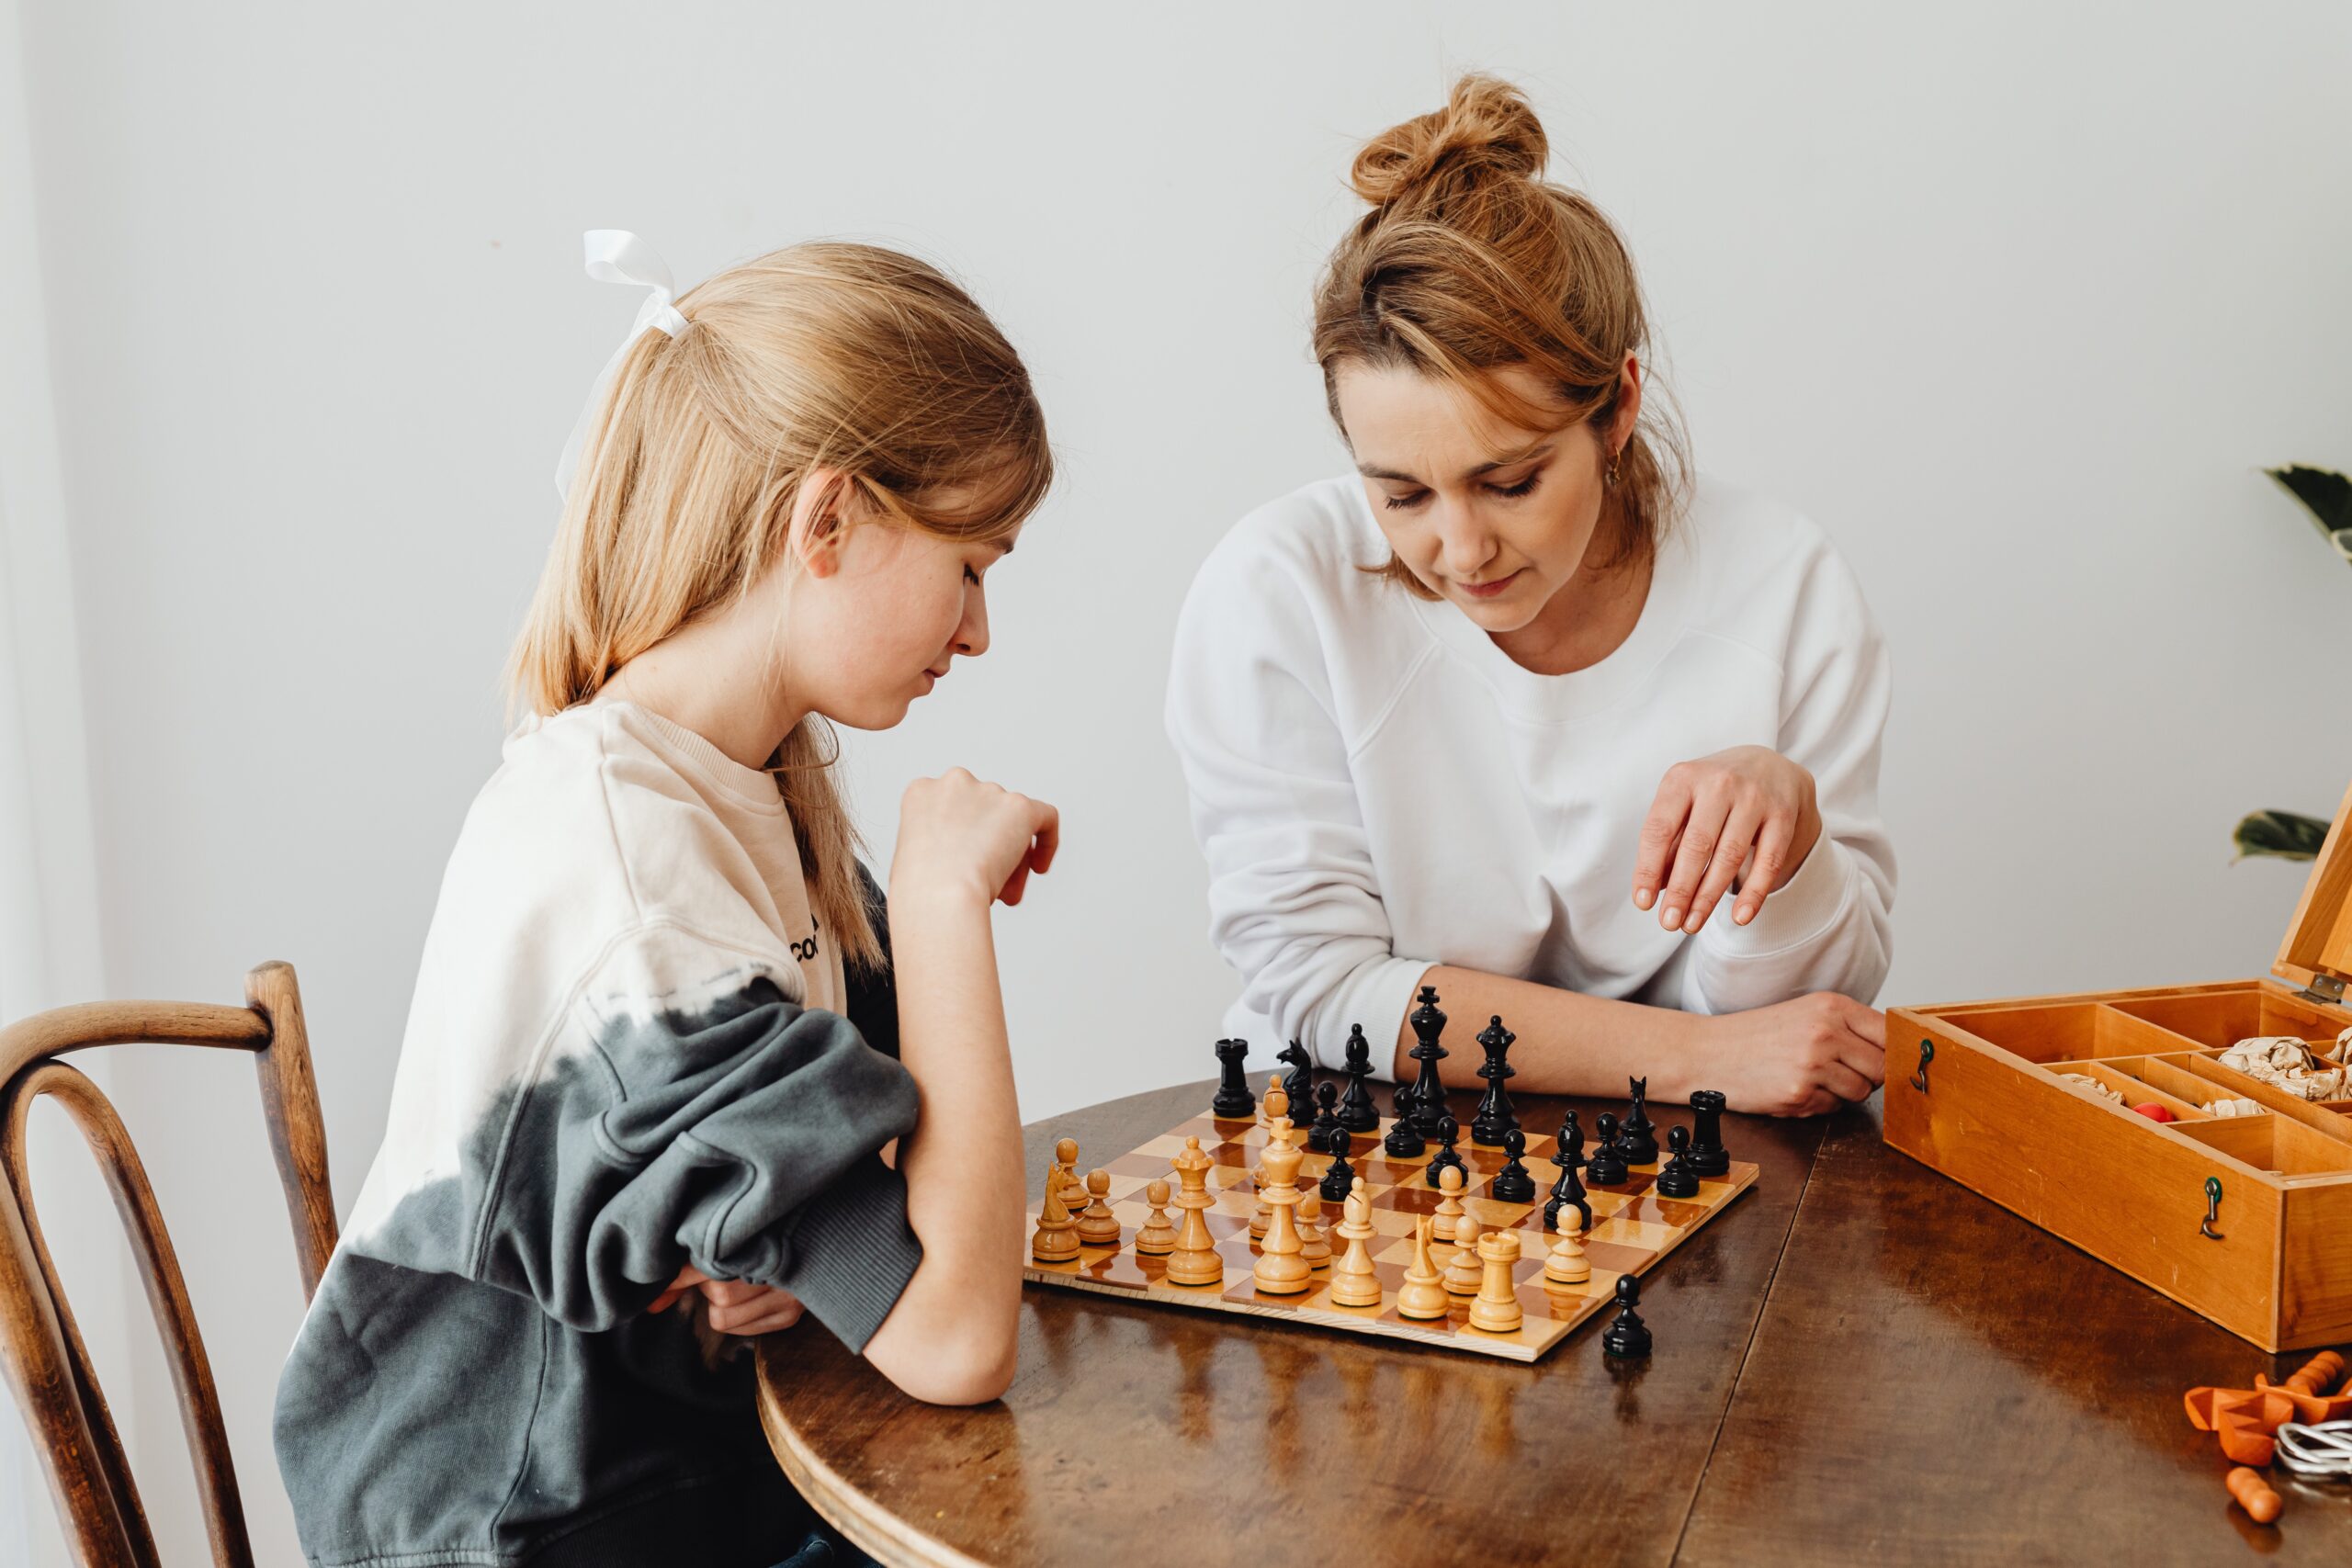 Mum and Daughter playing chess at a table